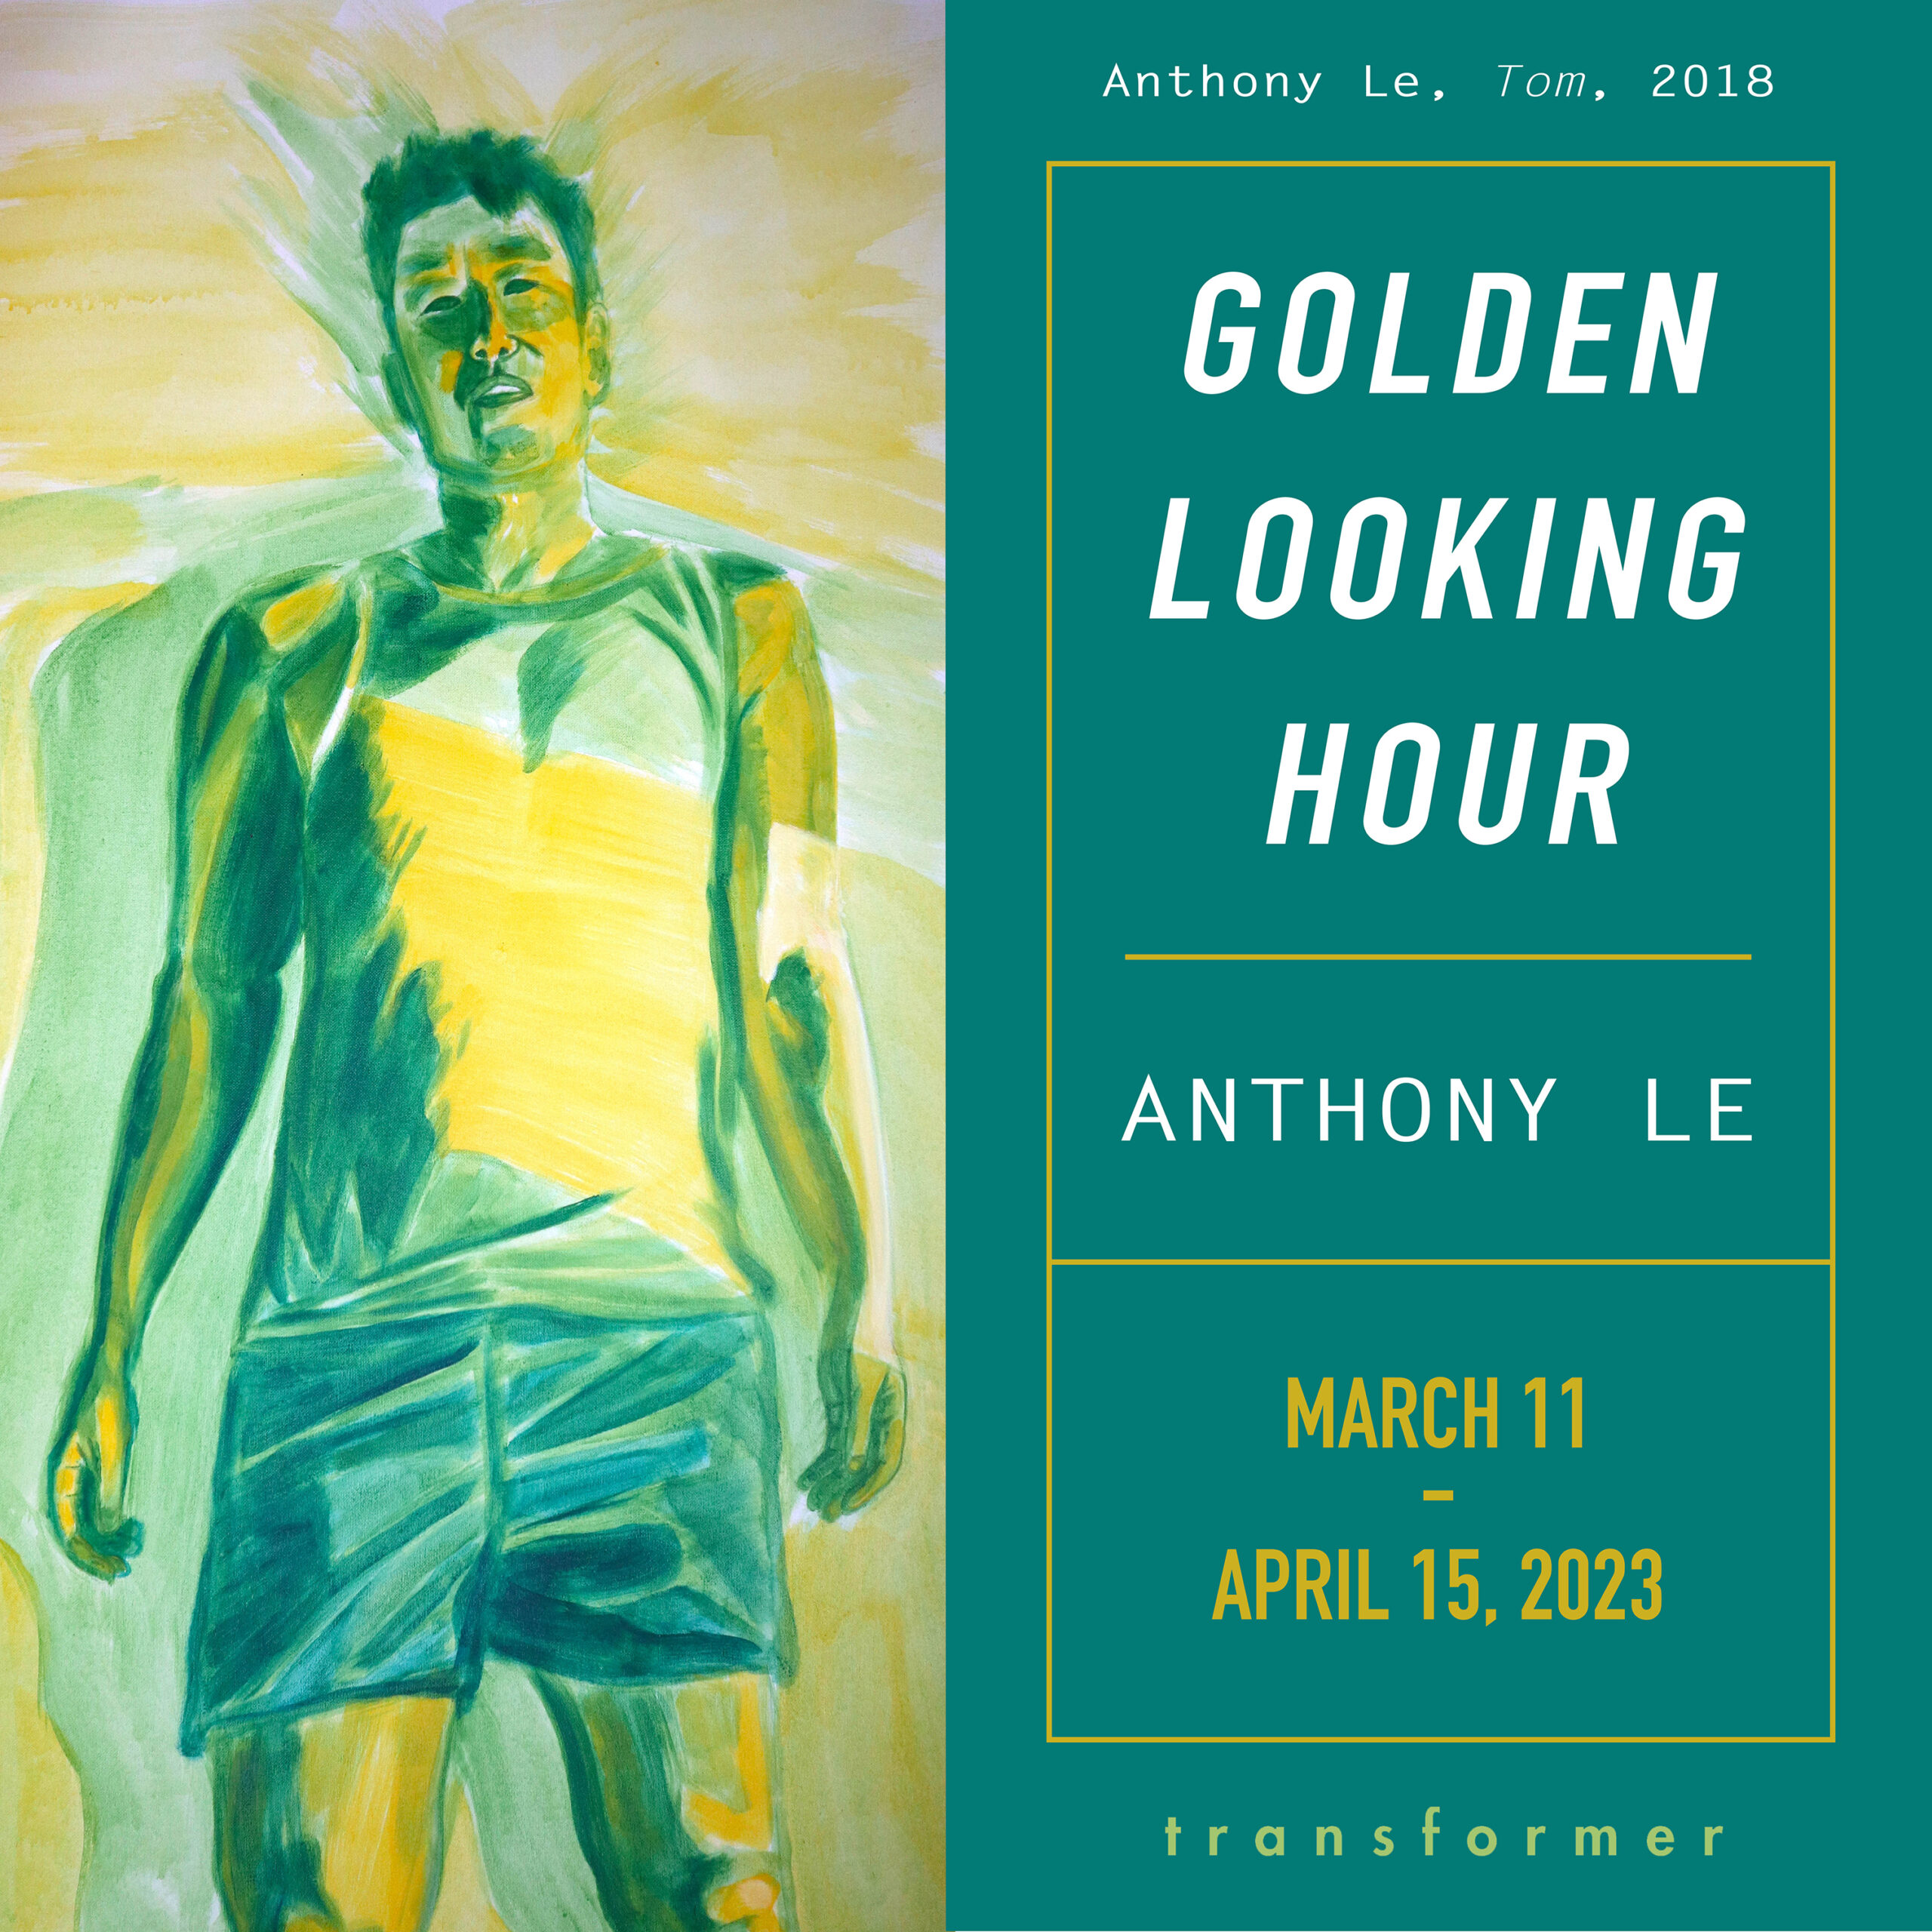 Anthony Le’s “Golden Looking Hour” at Transformer Opening Reception